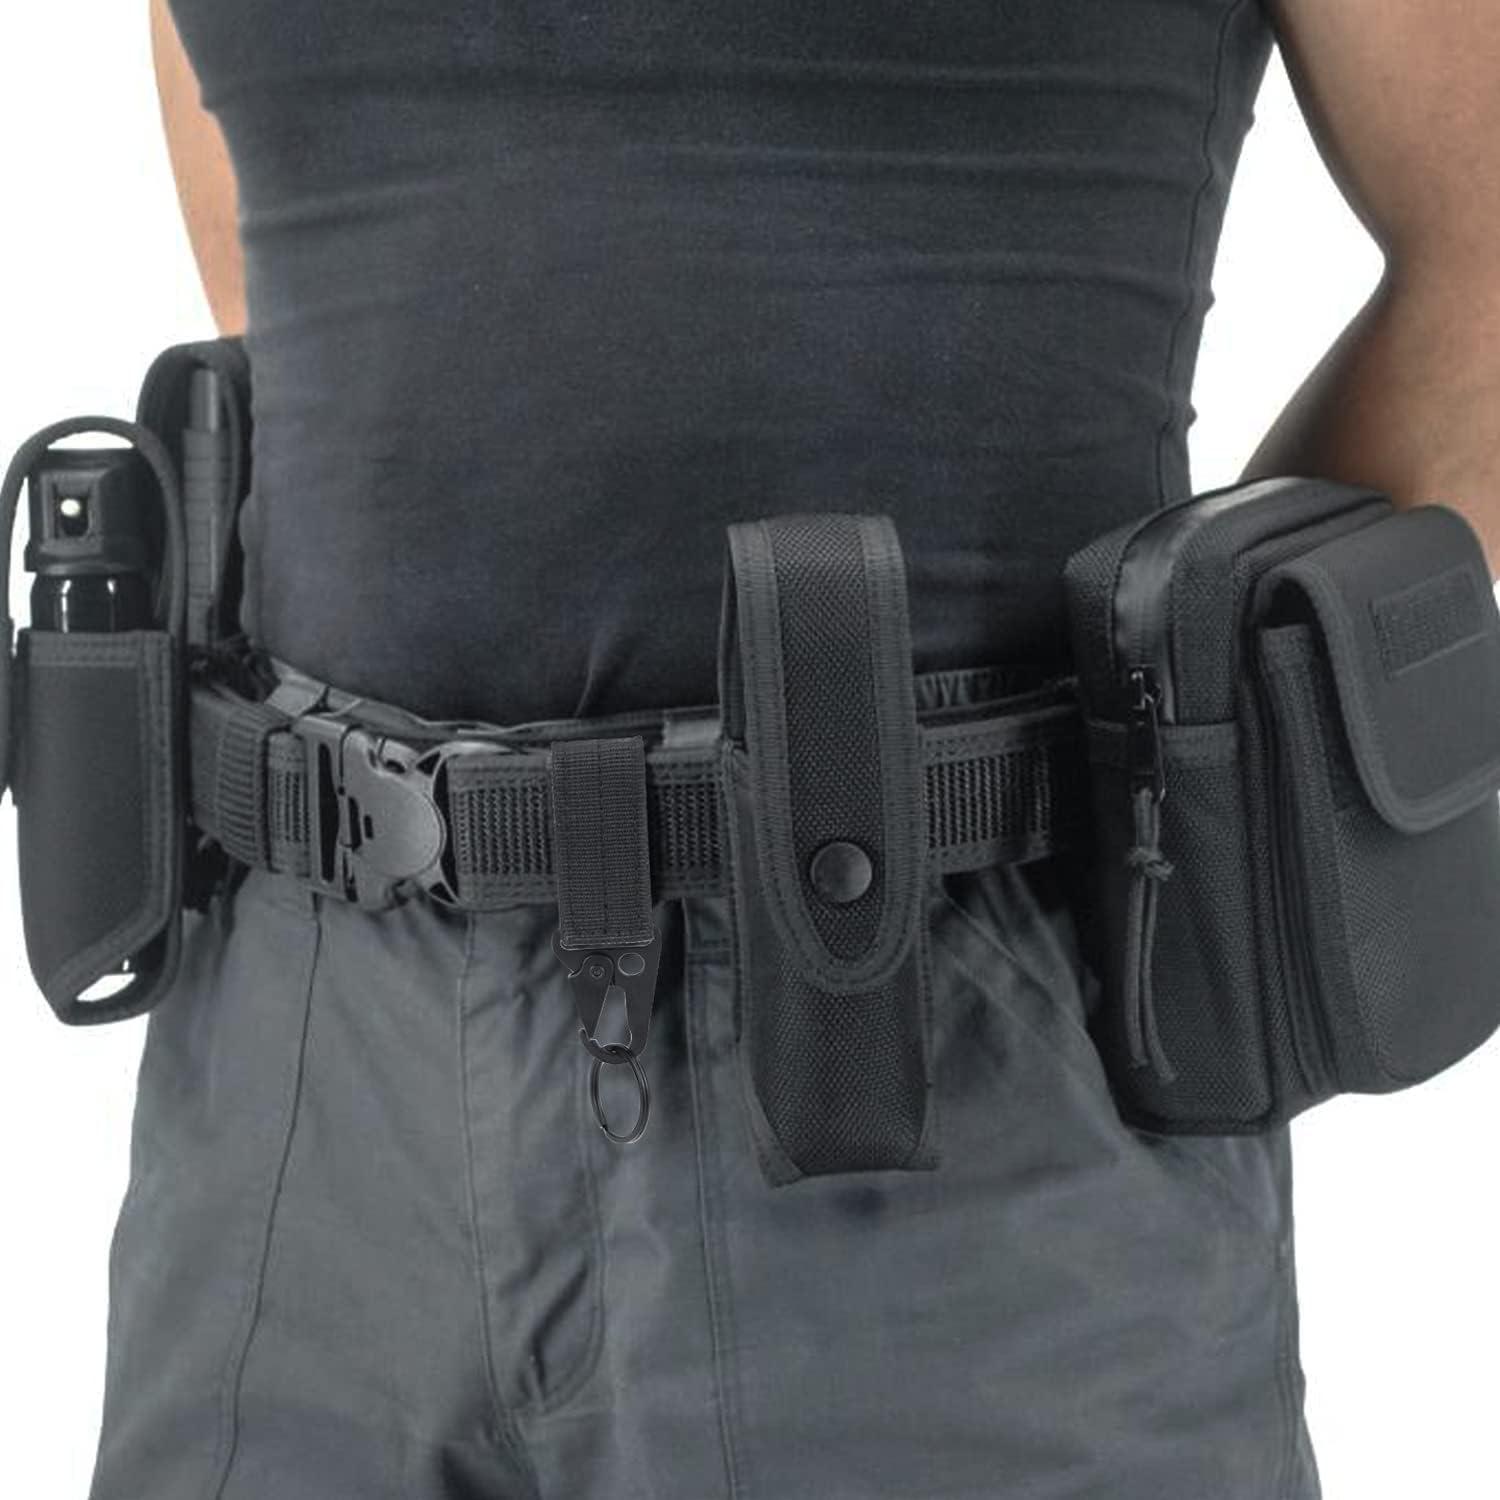 Belt Keepers with Tactical Gear Clip, Law Enforcement Nylon Duty